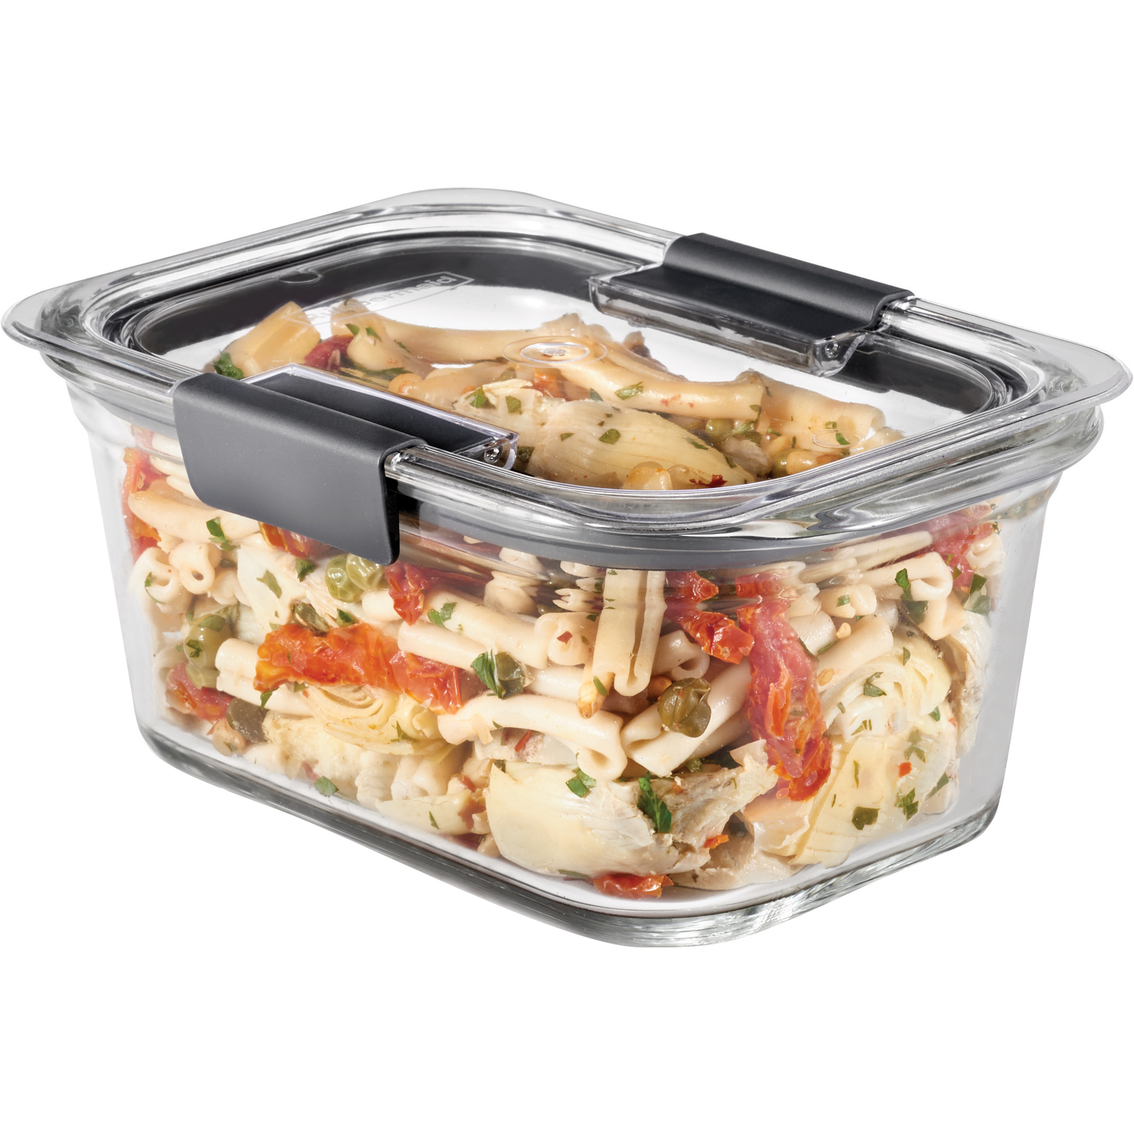 Rubbermaid Brilliance 2-pc. 3.2-Cup Food Storage Container Set